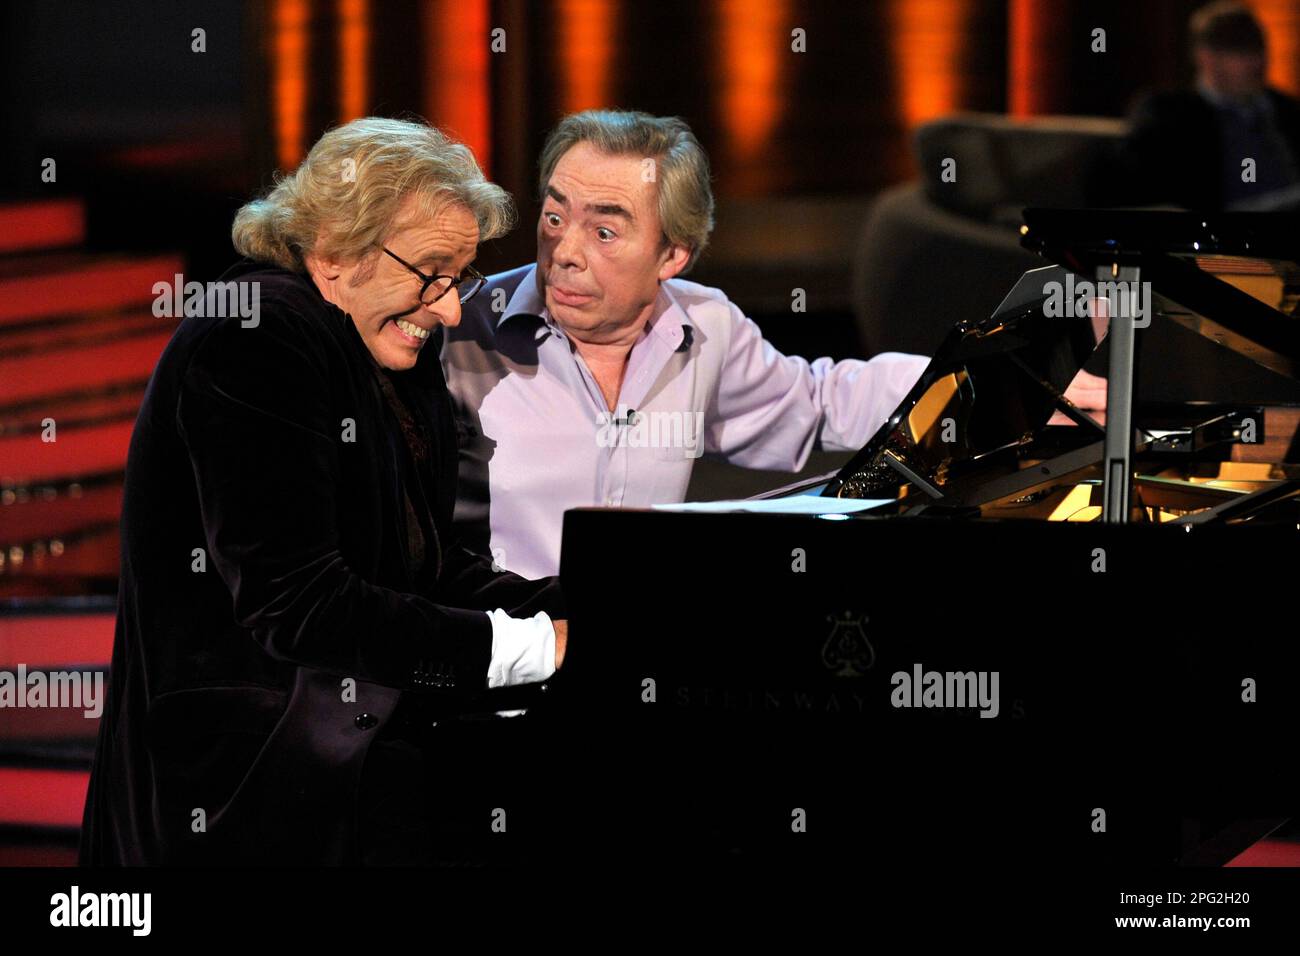 ARCHIVE PHOTO: Andrew LLOYD-WEBBER will be 75 years old on March 22, 2023, moderator Thomas GOTTSCHALK and composer Andrew LLOYD WEBBER, at the piano, Wetten that.? from Salzburg, 03/27/2010. ?SVEN SIMON#Prinzess-Luise-Strasse 41#45479 Muelheim/R uhr #tel. 0208/9413250#fax. 0208/9413260#GLSB bank, account no.: 4030 025 100, BLZ 430 609 67# www.SvenSimon.net. Stock Photo